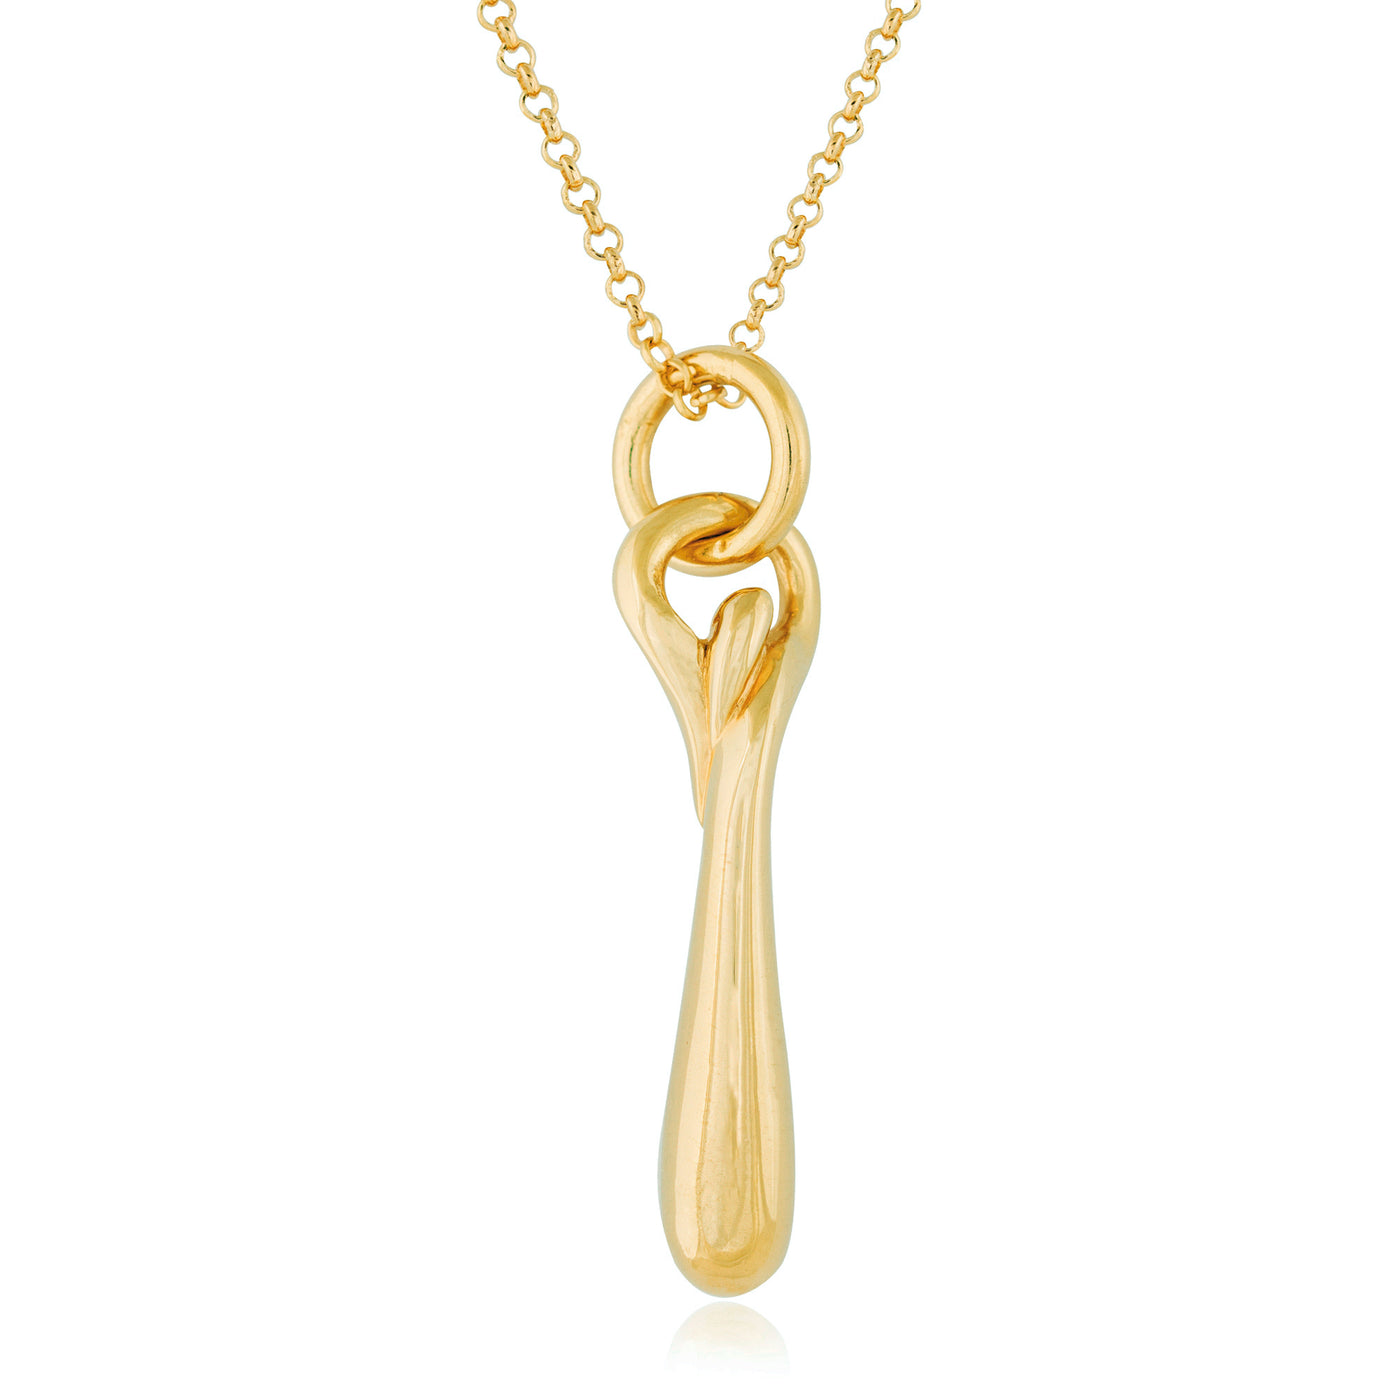 Gold pendant necklace from Atelier ORMAN